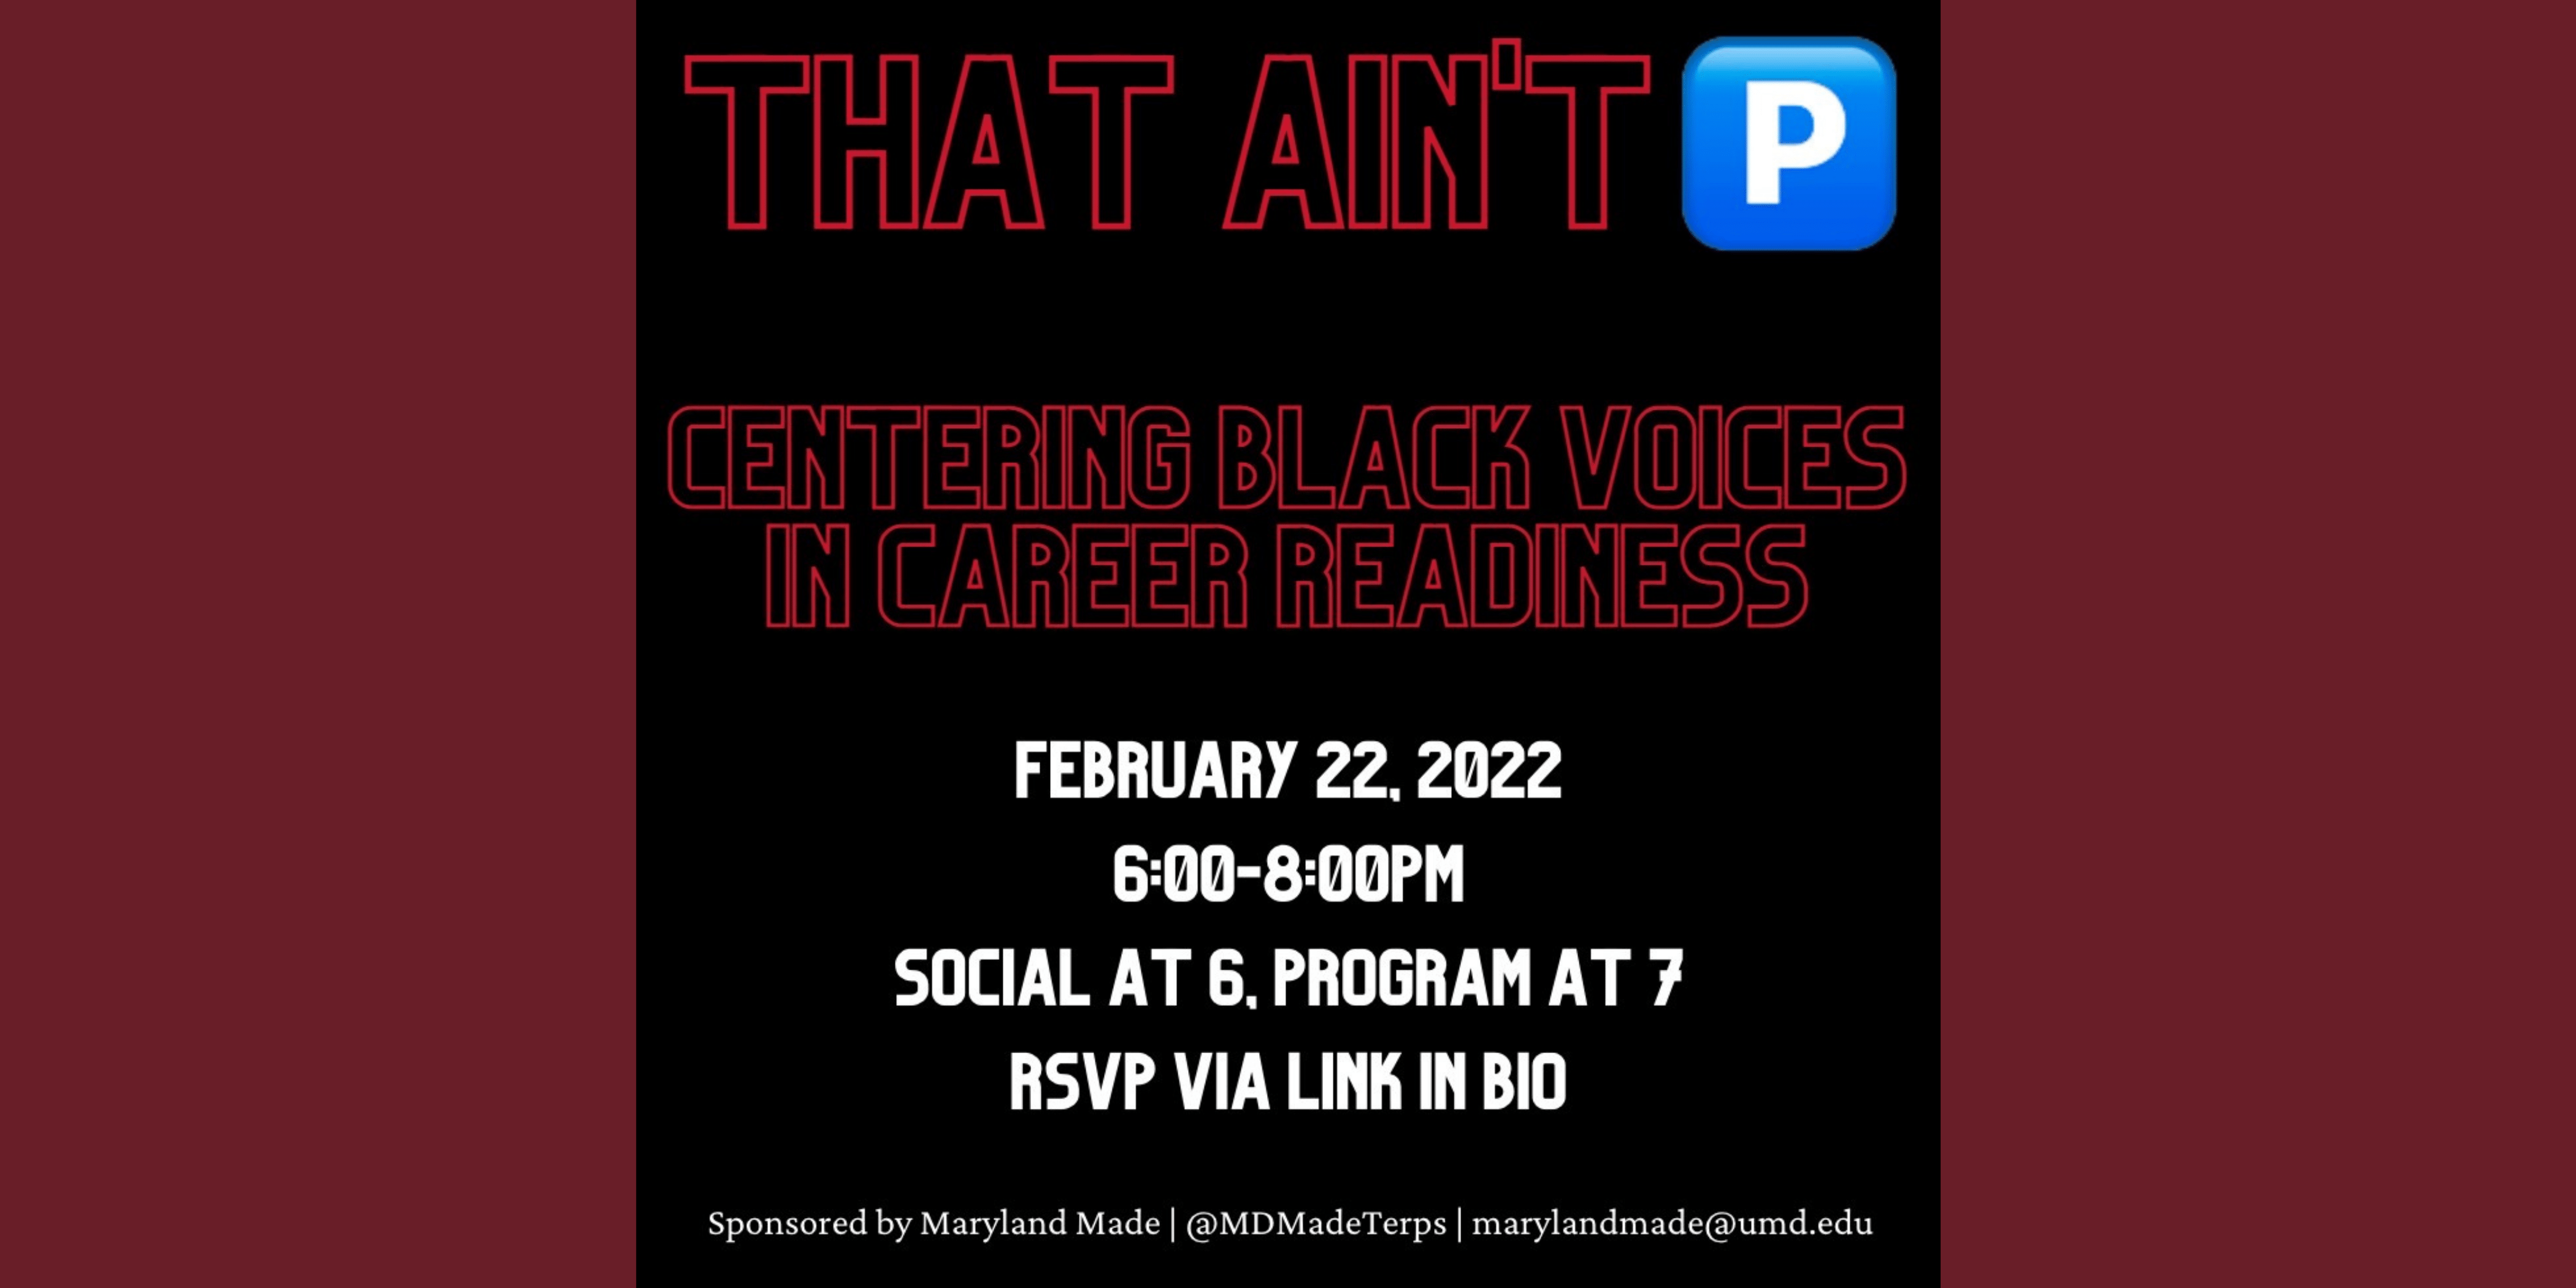 Thumbnail: That Ain't P - Centering Black Voices in Career Readiness